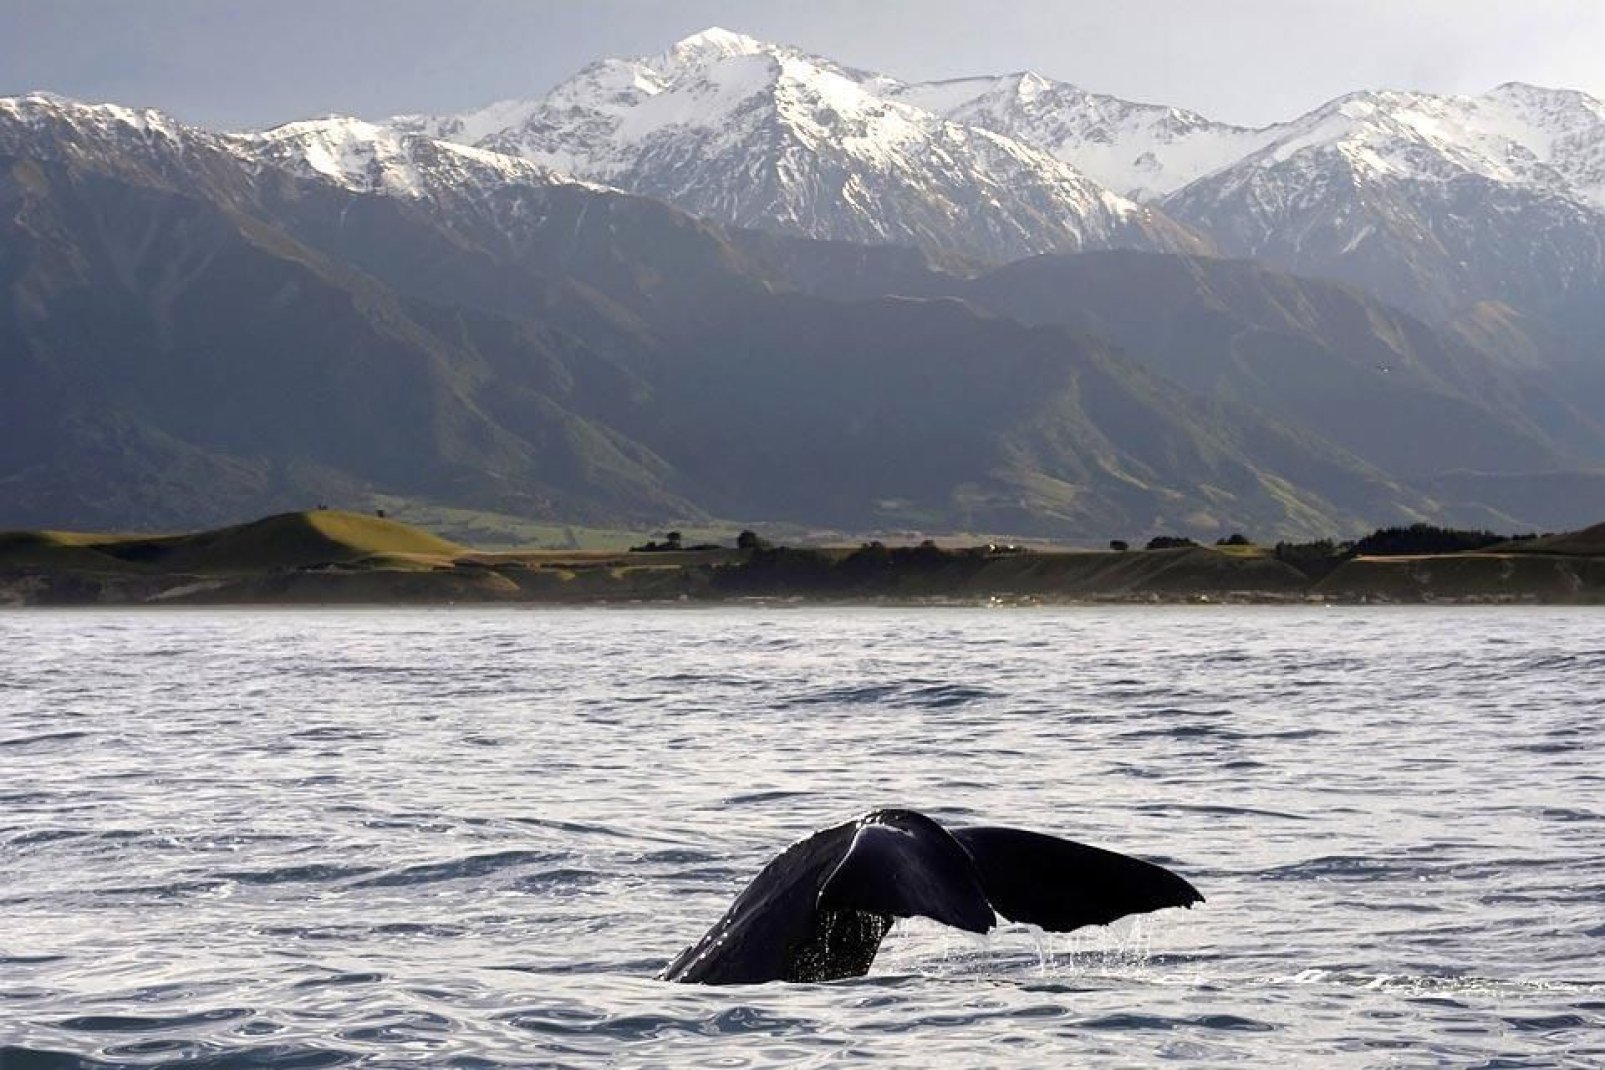 You can observe whales in their natural habitat while out on a boat excursion.